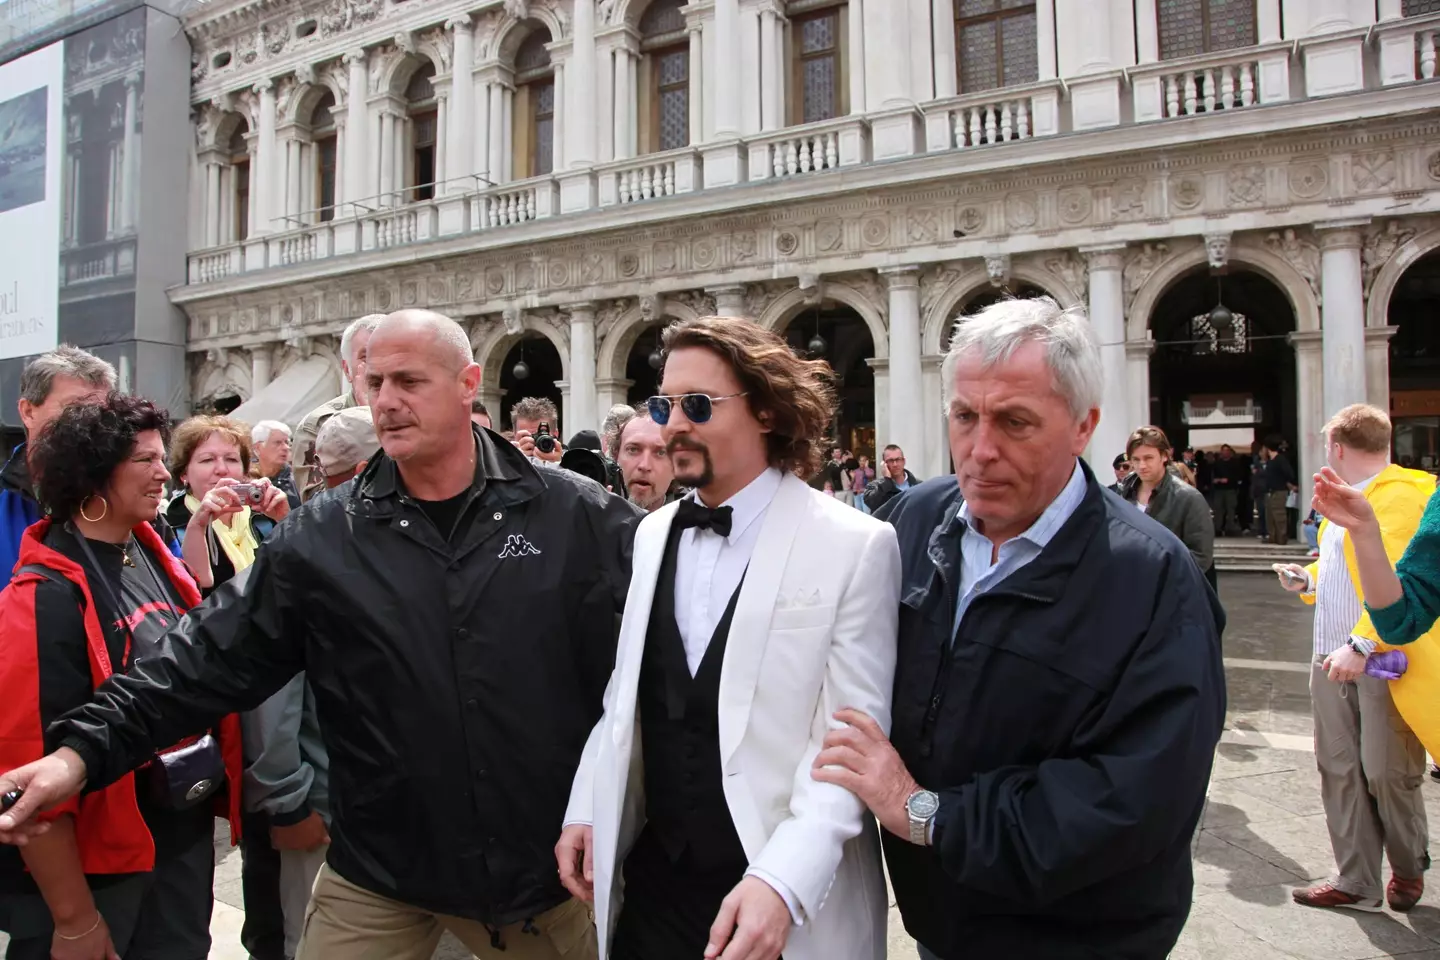 Actor Johnny Depp during the shooting of the film the tourist in St. Mark's square Venice.